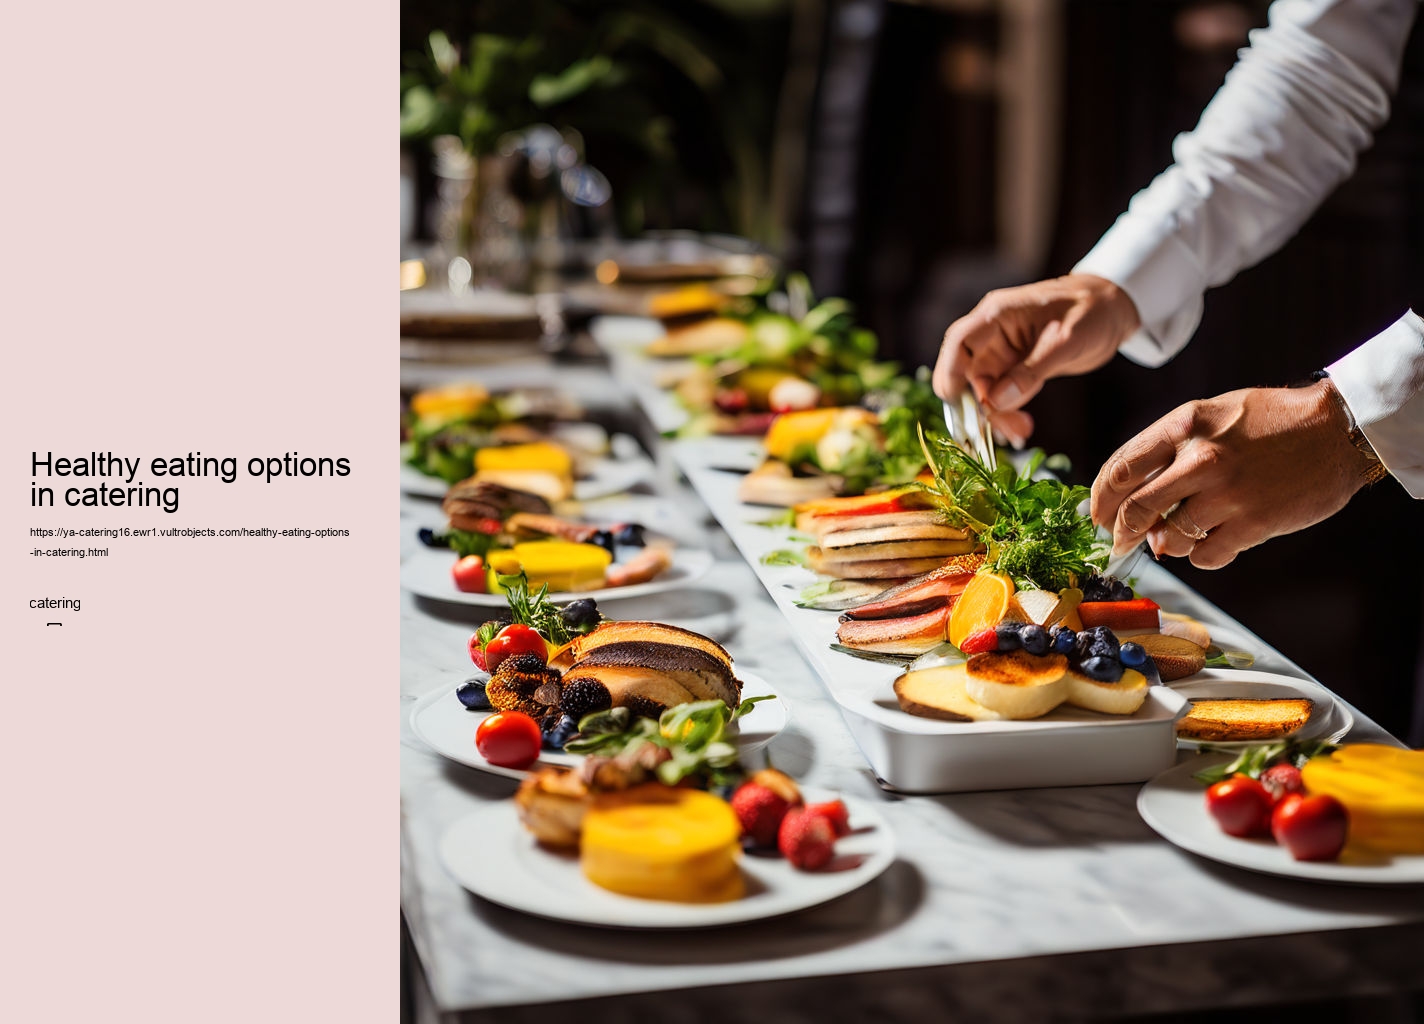 Healthy eating options in catering